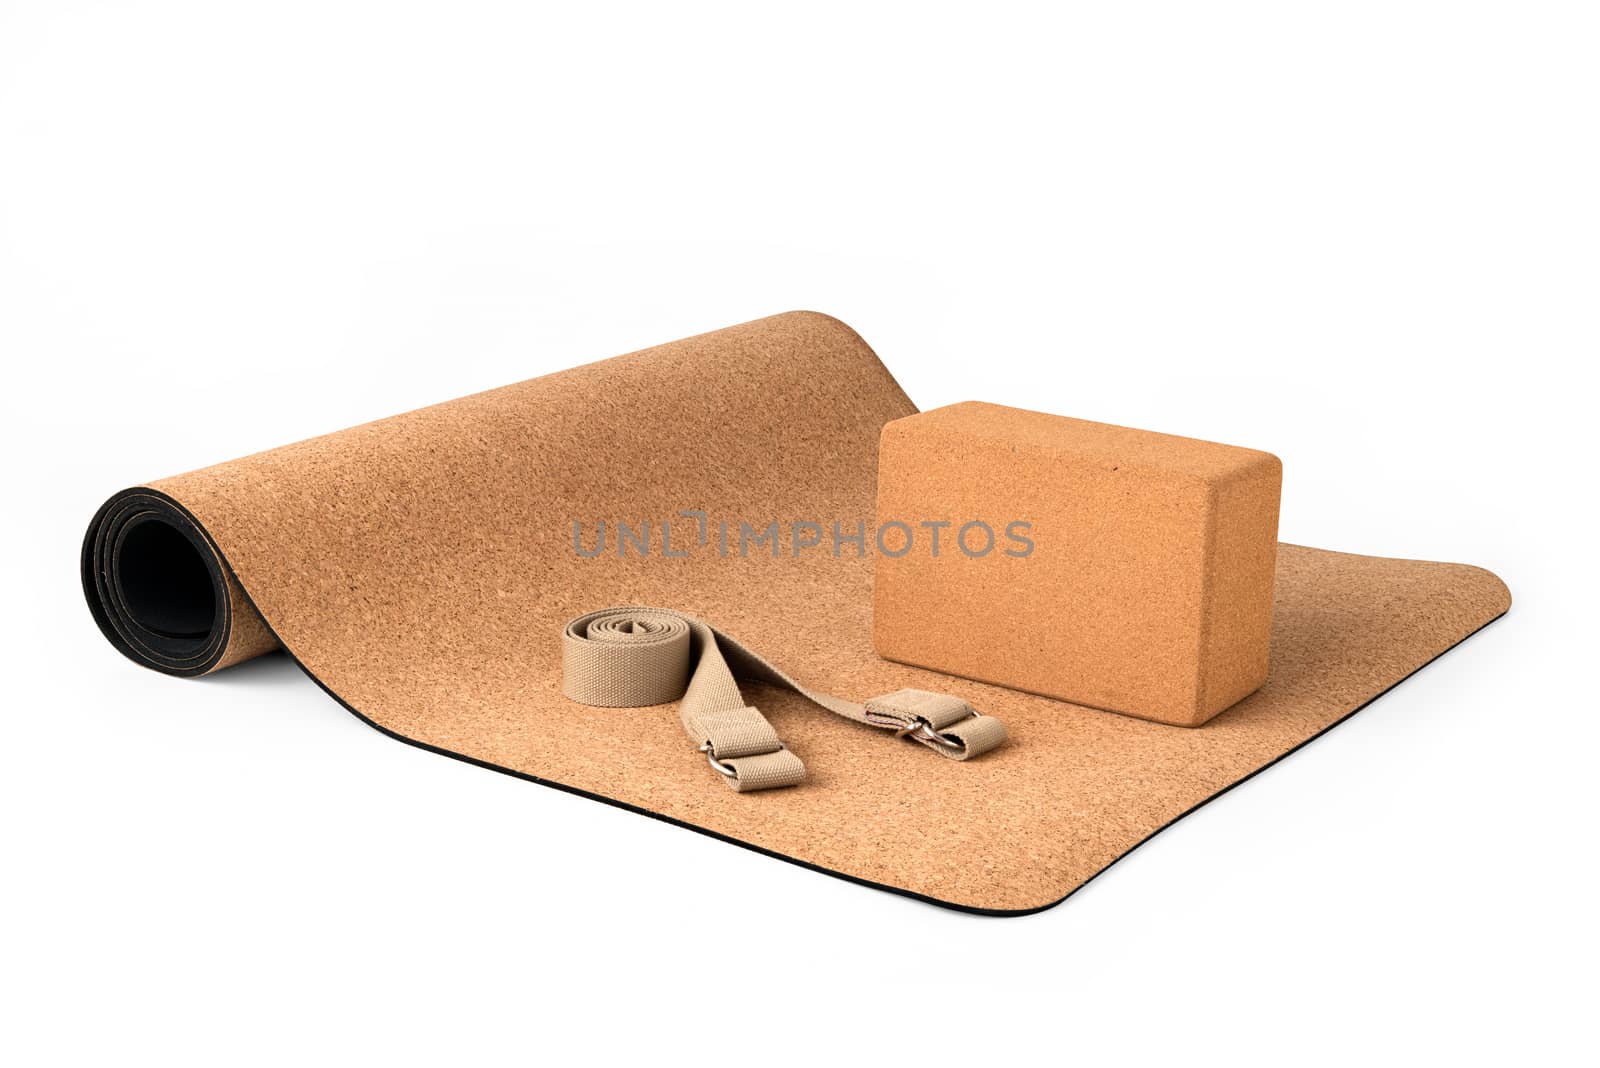 Cork Yoga Mat Set With Cork Block and Strap, Premium Eco Friendly Product on White Background